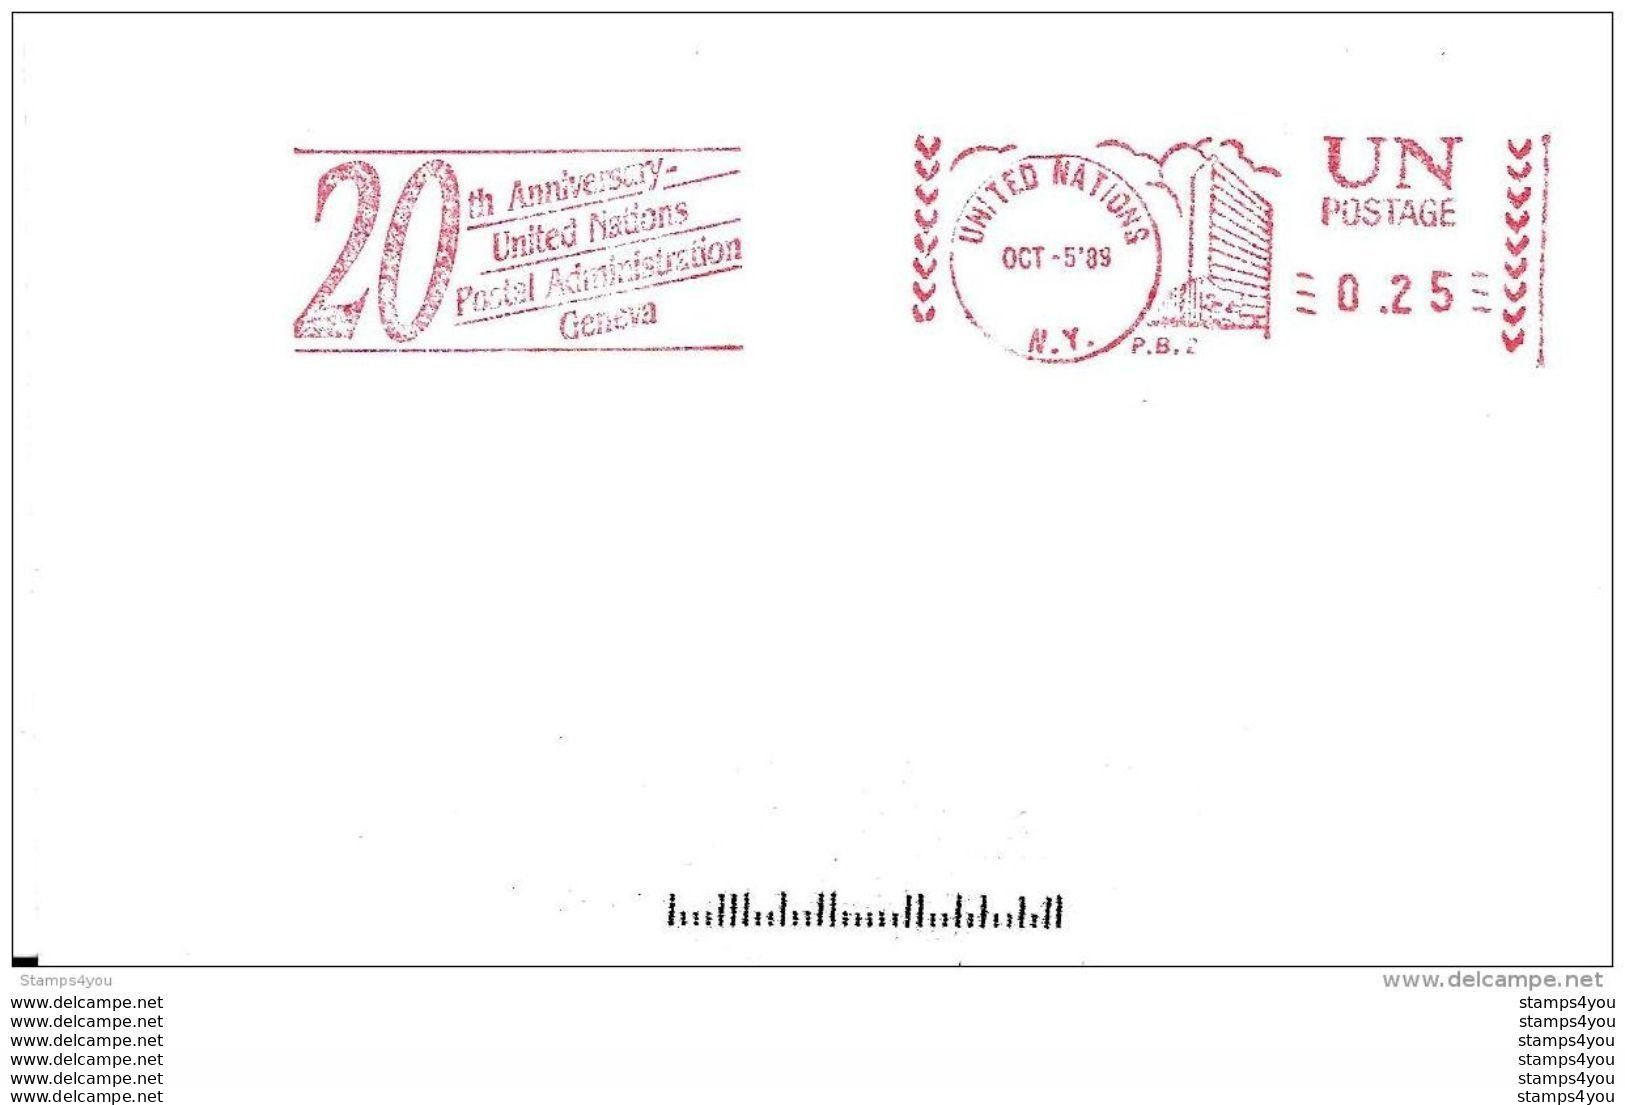 56 - 99 - Enveloppe Nataions Unies New York - Oblit Mécanique 20th Anniversary 1989 - Covers & Documents